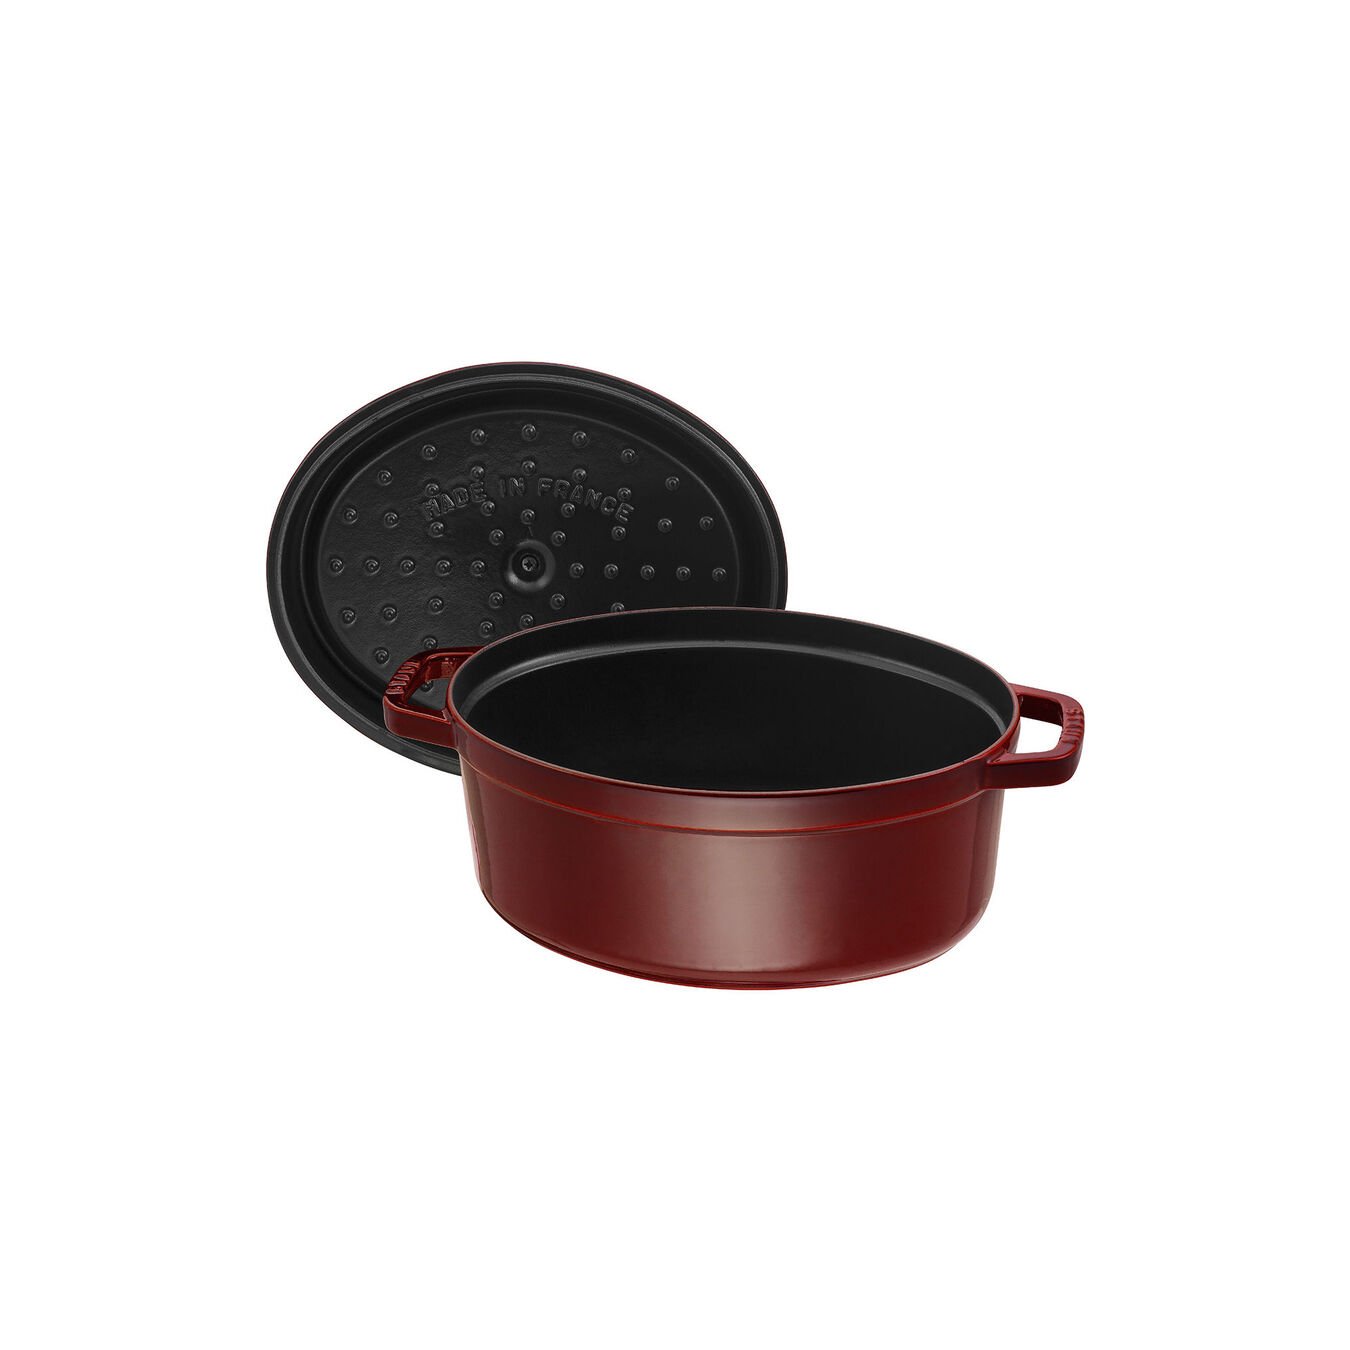 Cocotte 31 cm, oval, Grenadine-Rot, Gusseisen,,large 3